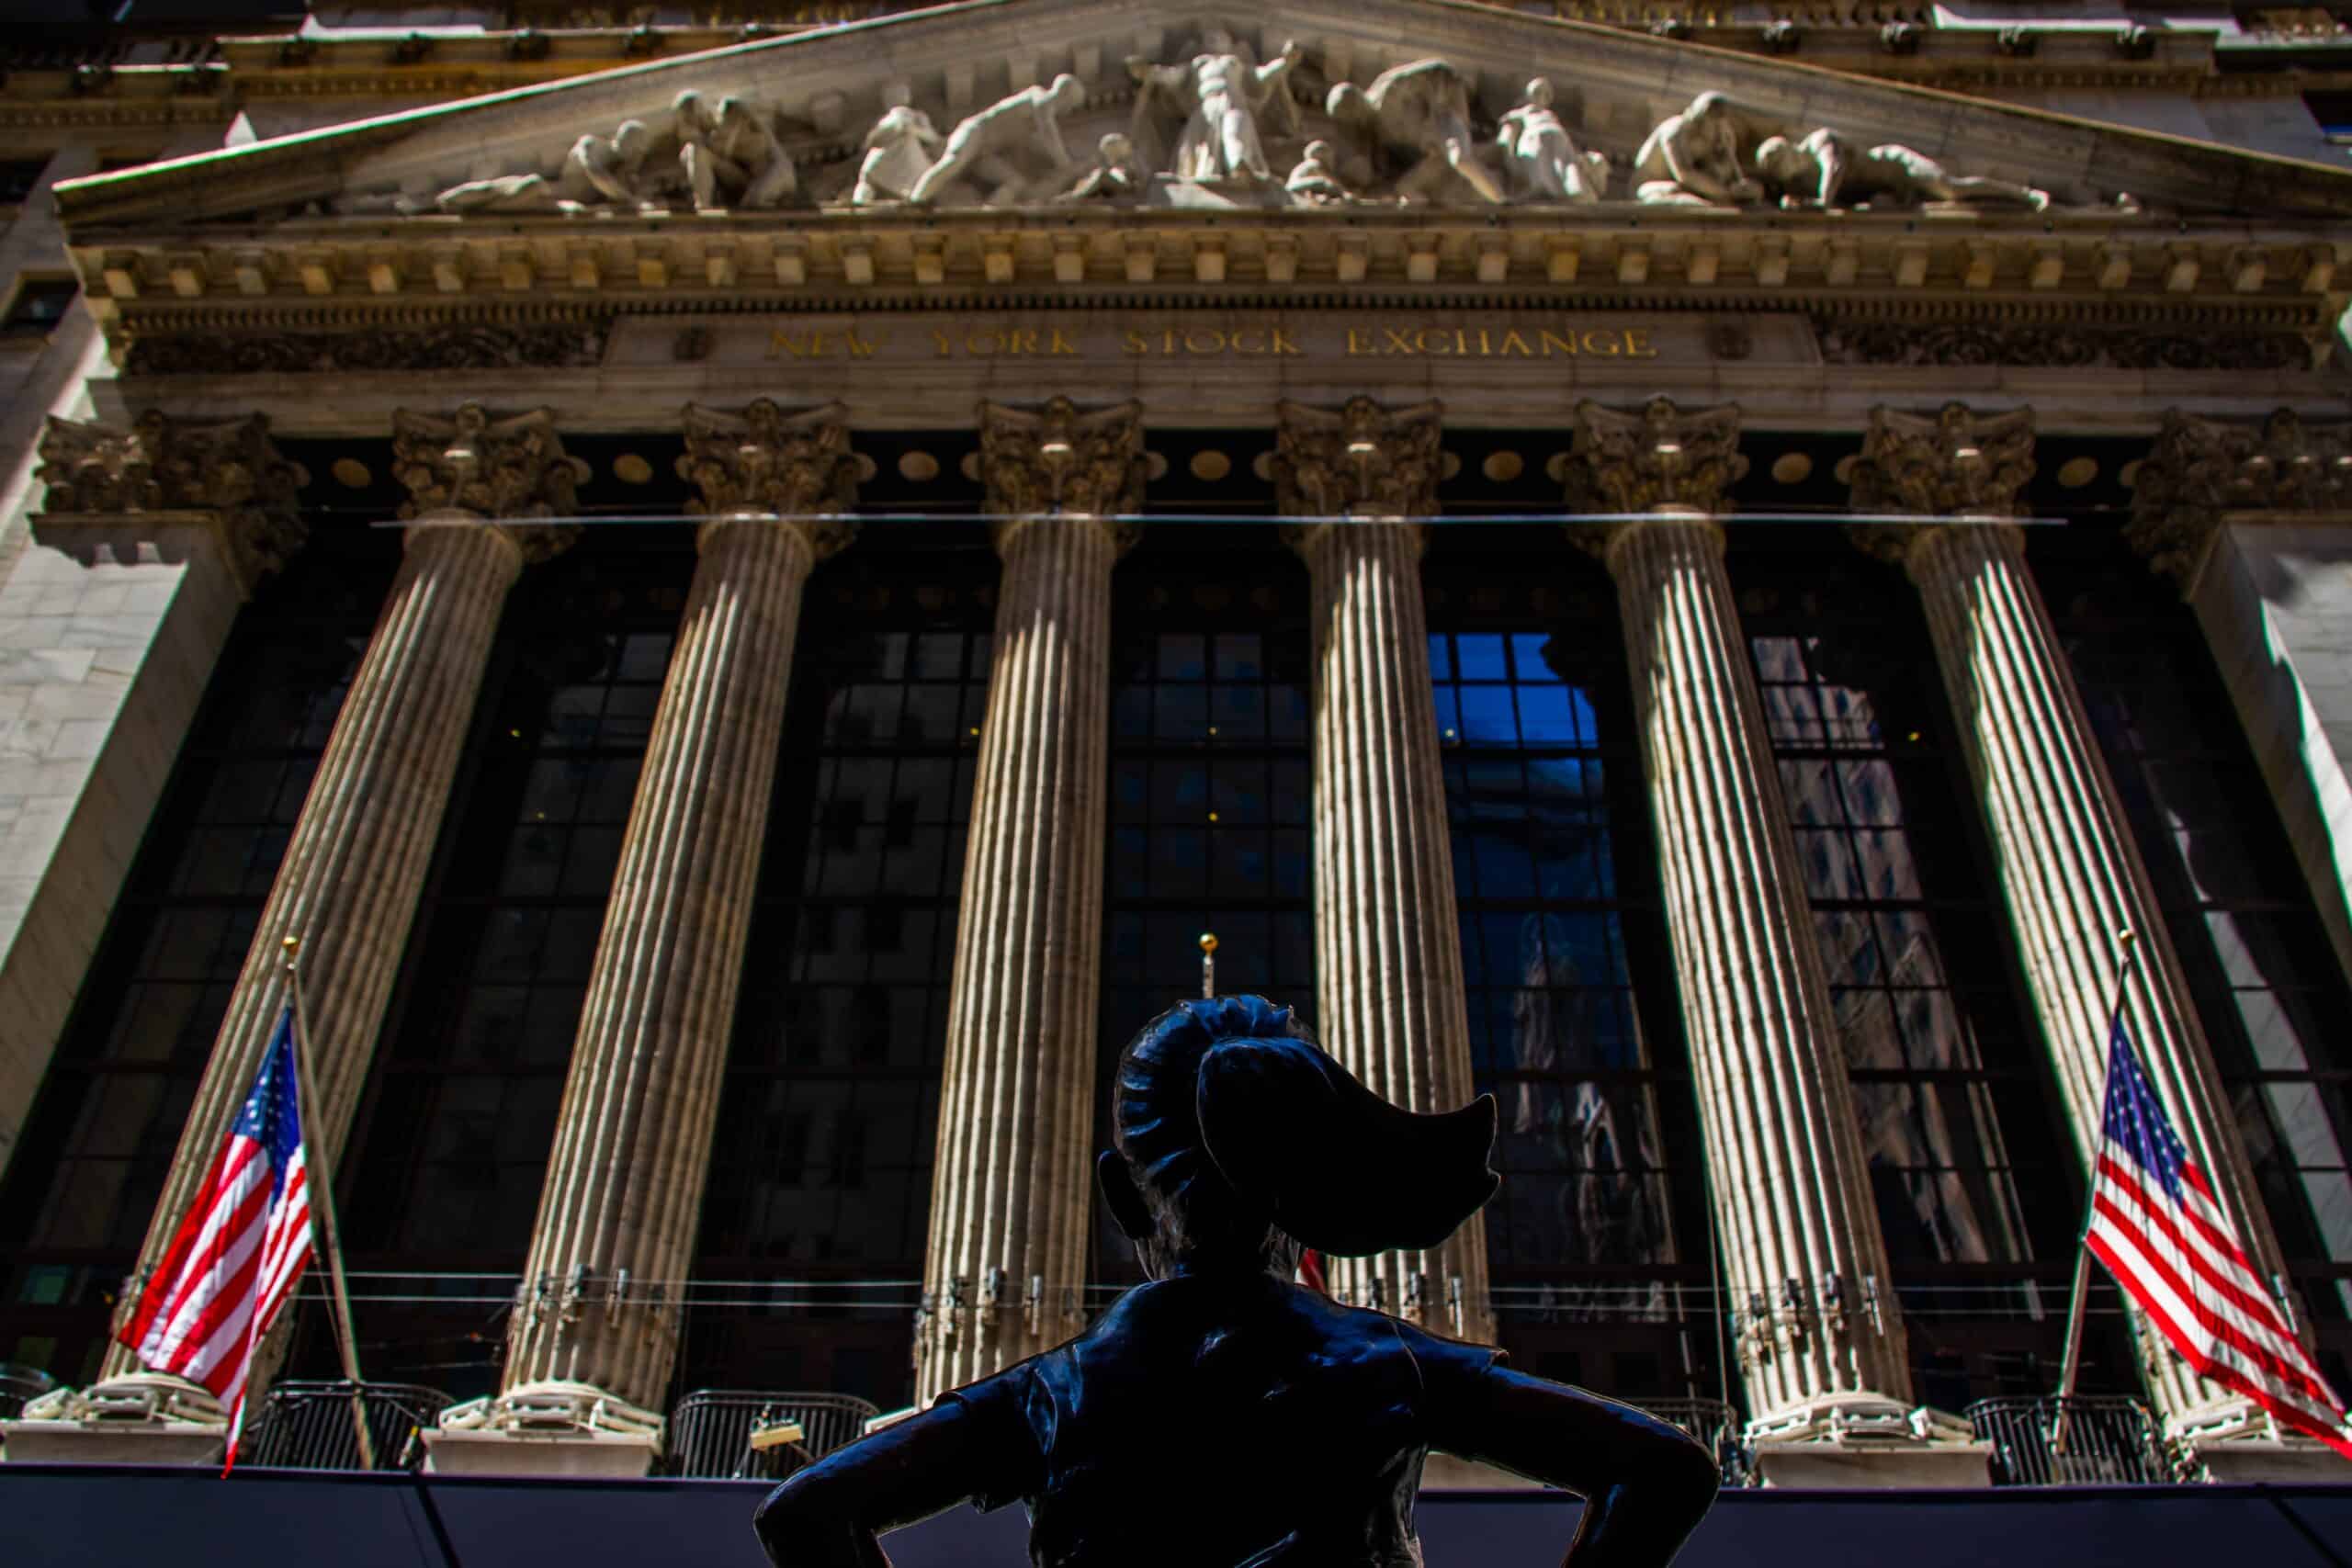 New York Stock Exchange building from statue's point of view